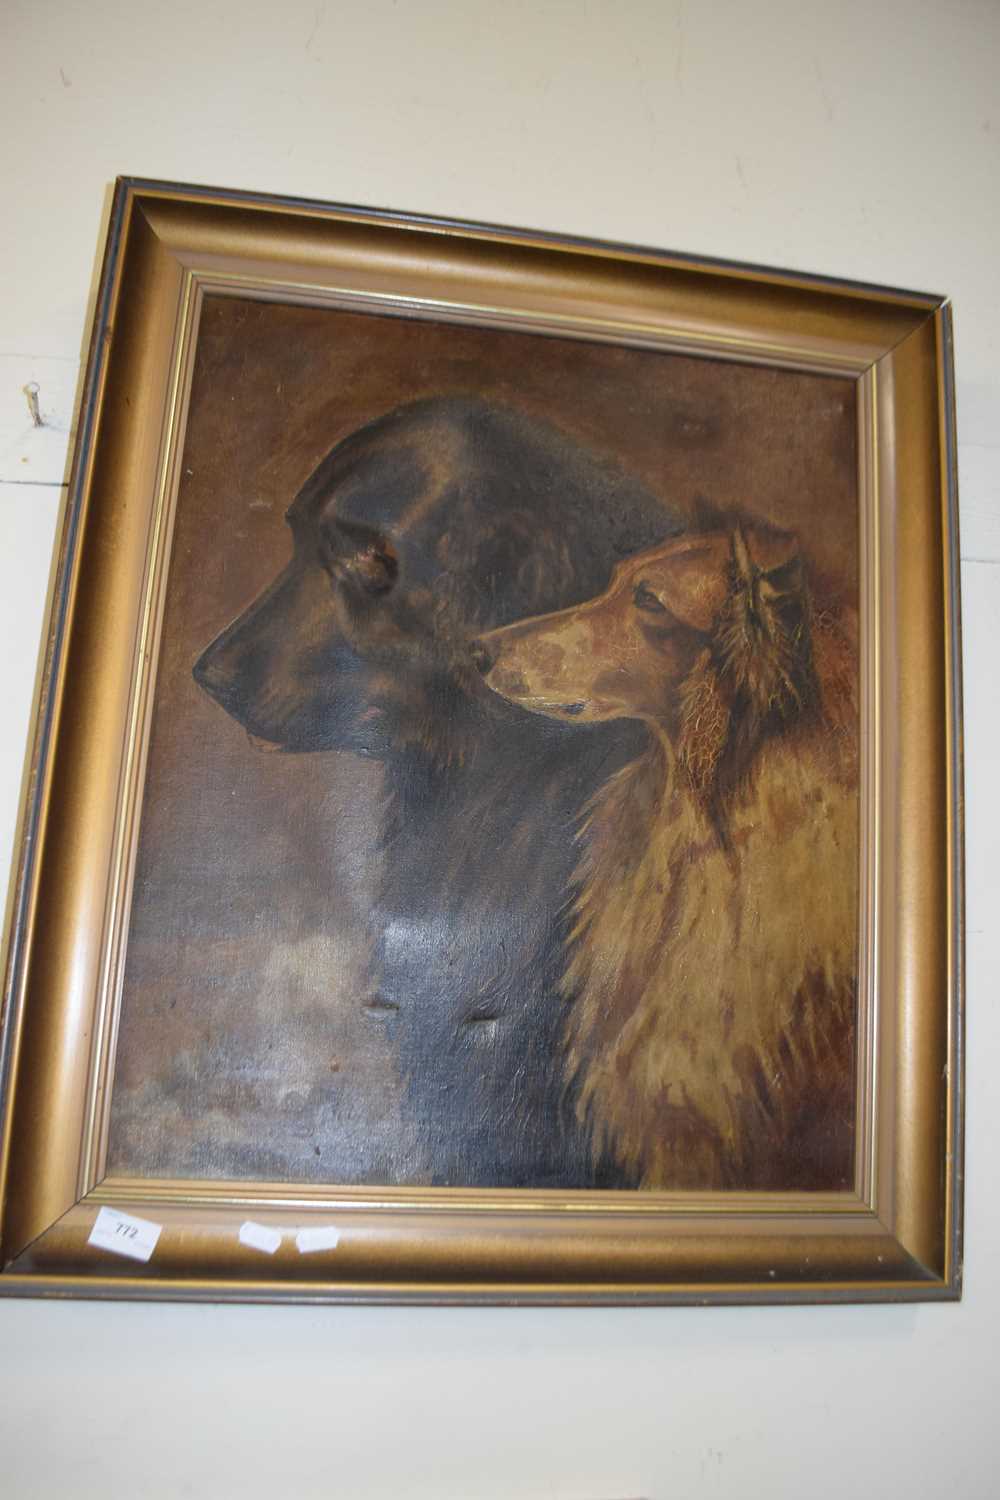 LATE 19TH/EARLY 20TH CENTURY SCHOOL STUDY OF TWO DOGS, OIL ON CANVASS, GILT FRAMED